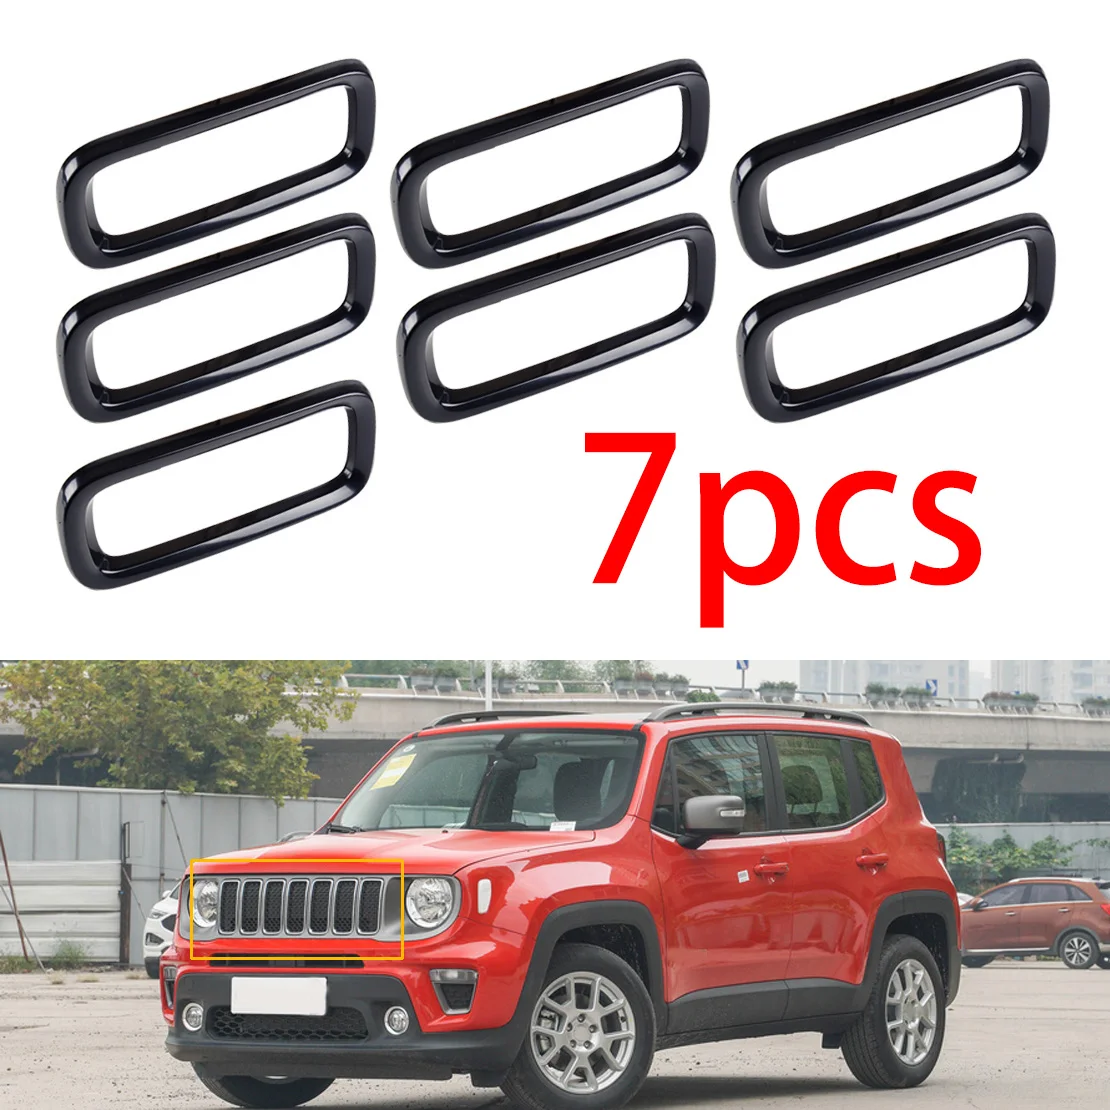 

DWCX 7pcs ABS Car Front Grill Inserts Mesh Grille Moulding Styling Black fit for Jeep Renegade 2015 2016 2017 2018